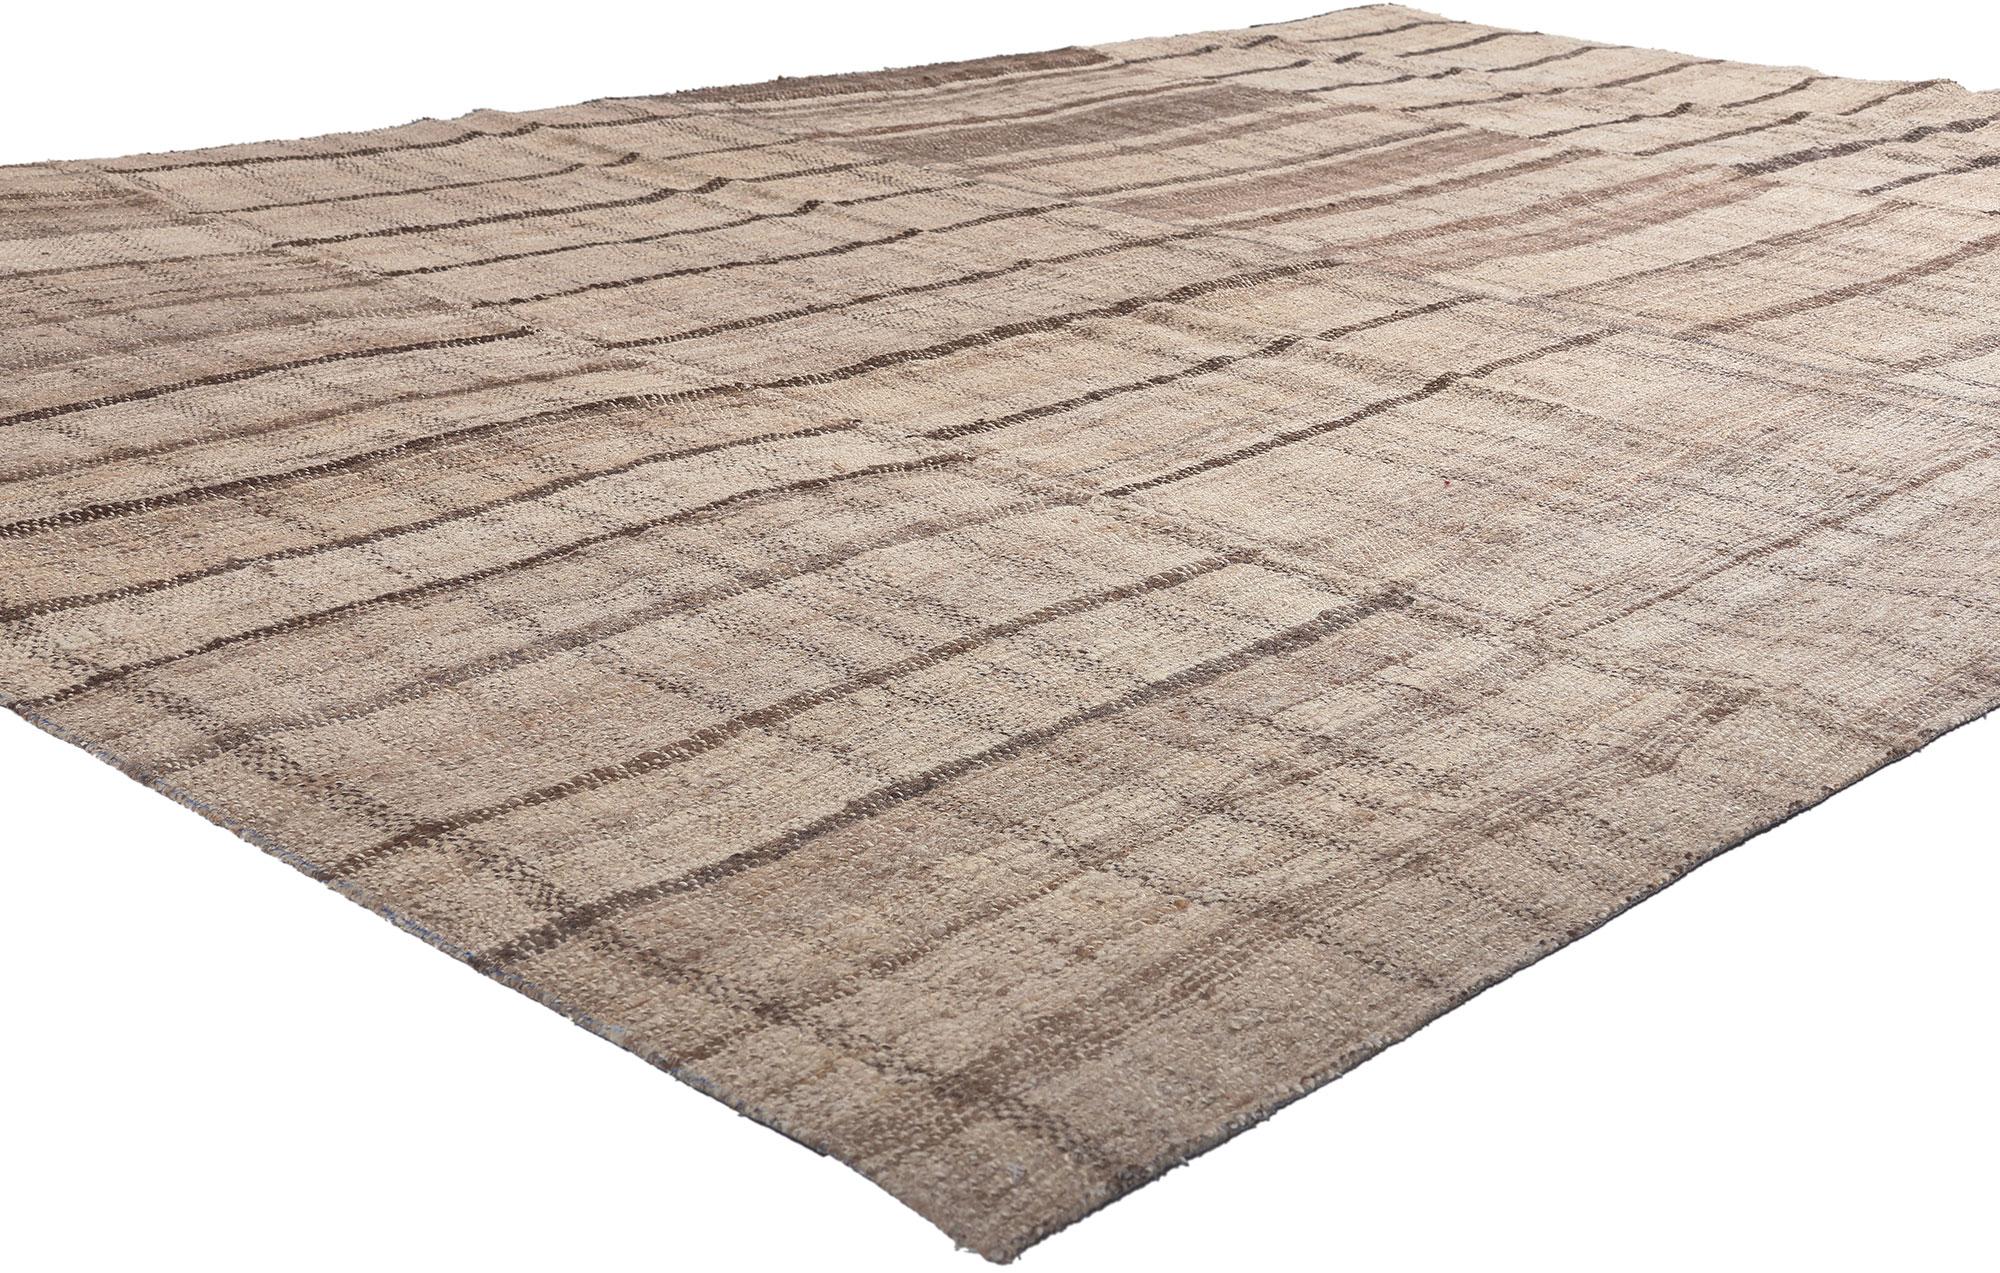 60637 Brown Vintage Striped Turkish Kilim Rug, 09'10 x 06'06. This handwoven wool vintage Turkish kilim rug embodies the essence of Shibu, seamlessly intertwining with a dedication to sustainable design, creating a masterpiece that effortlessly